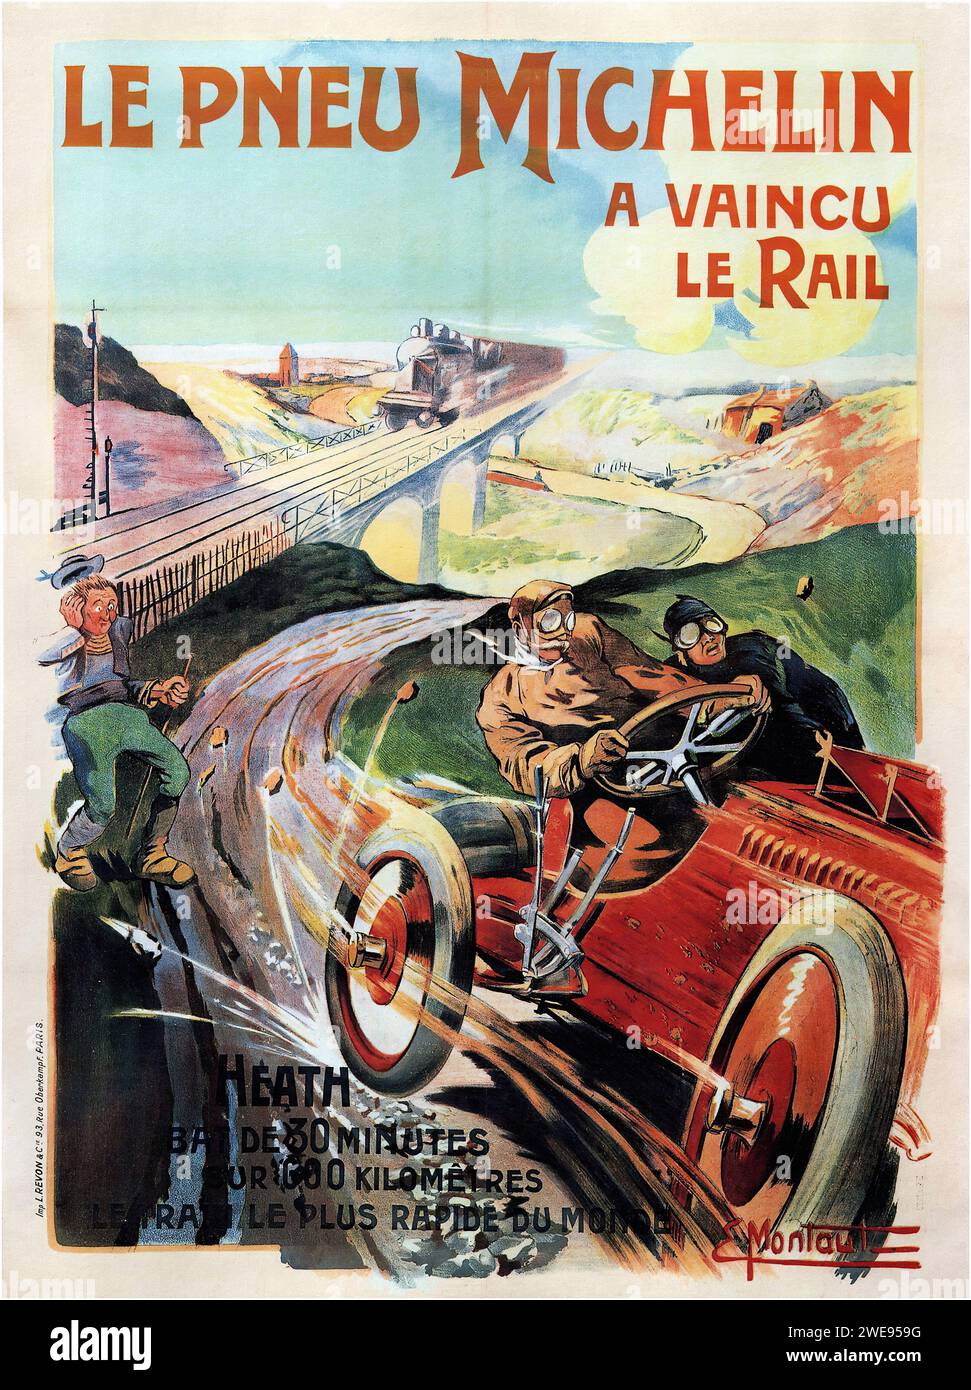 'LE PNEU MICHELIN A VAINCU LE RAIL' ['THE MICHELIN TIRE HAS DEFEATED THE RAIL'] Vintage French Advertising. An illustration shows a red car with passengers wearing goggles, speeding ahead of a train. The style is dynamic and colorful, typical of early 20th-century commercial art. Stock Photo